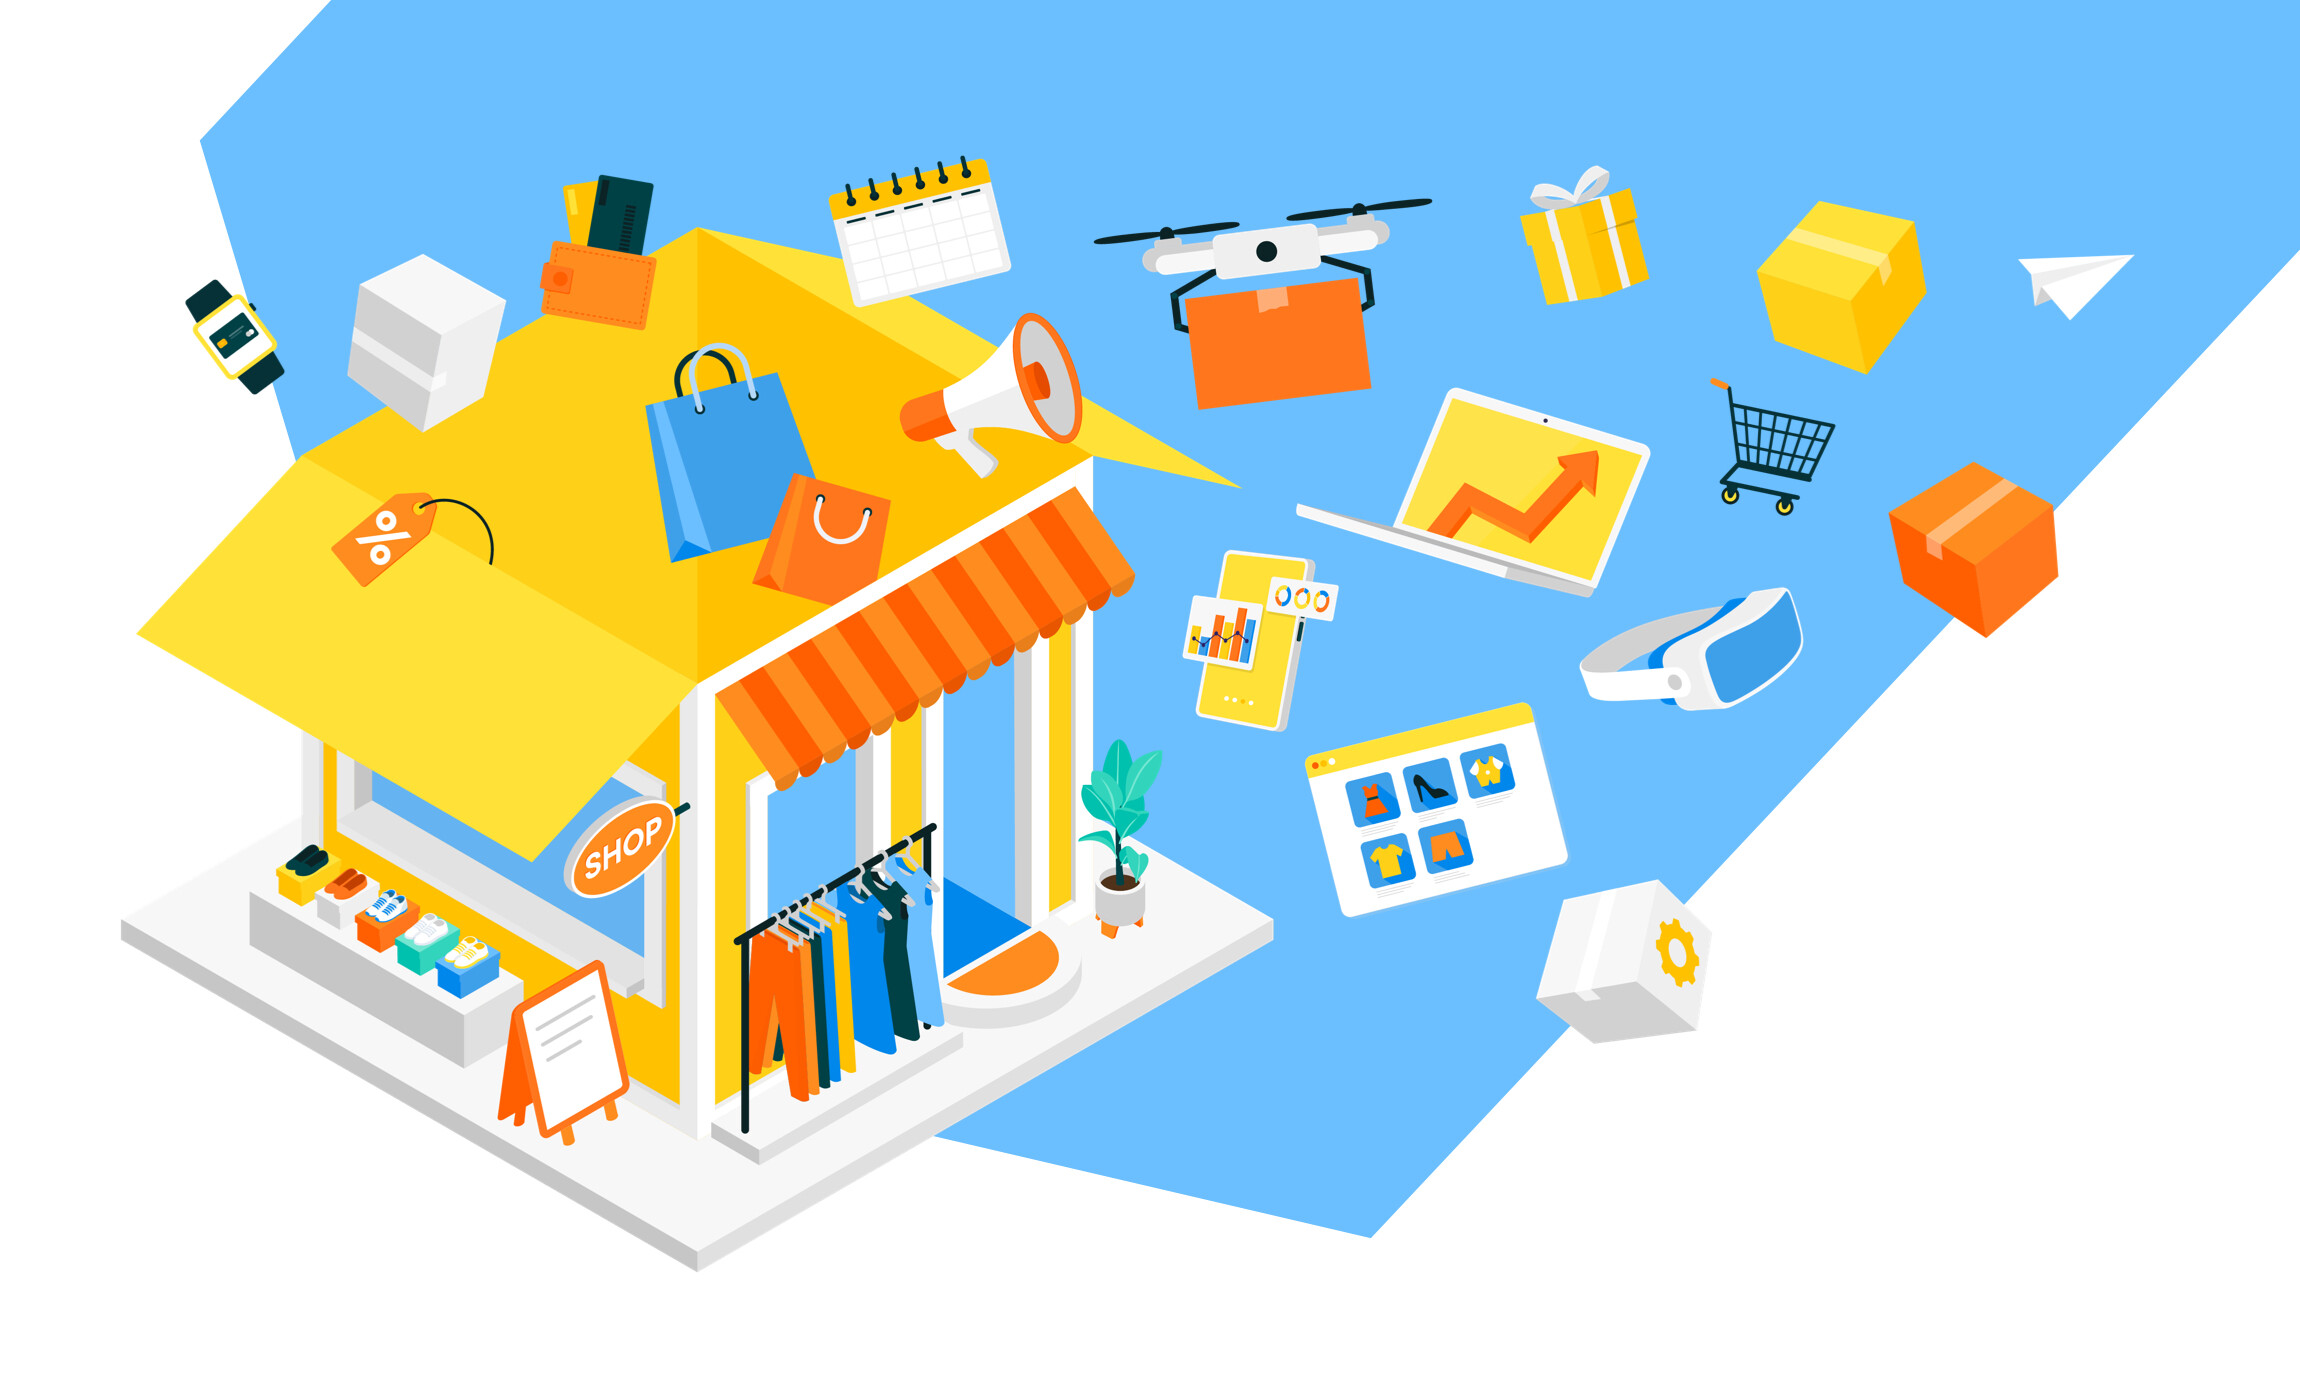 The biggest tech trends, innovations and challenges in the retail industry for 2023